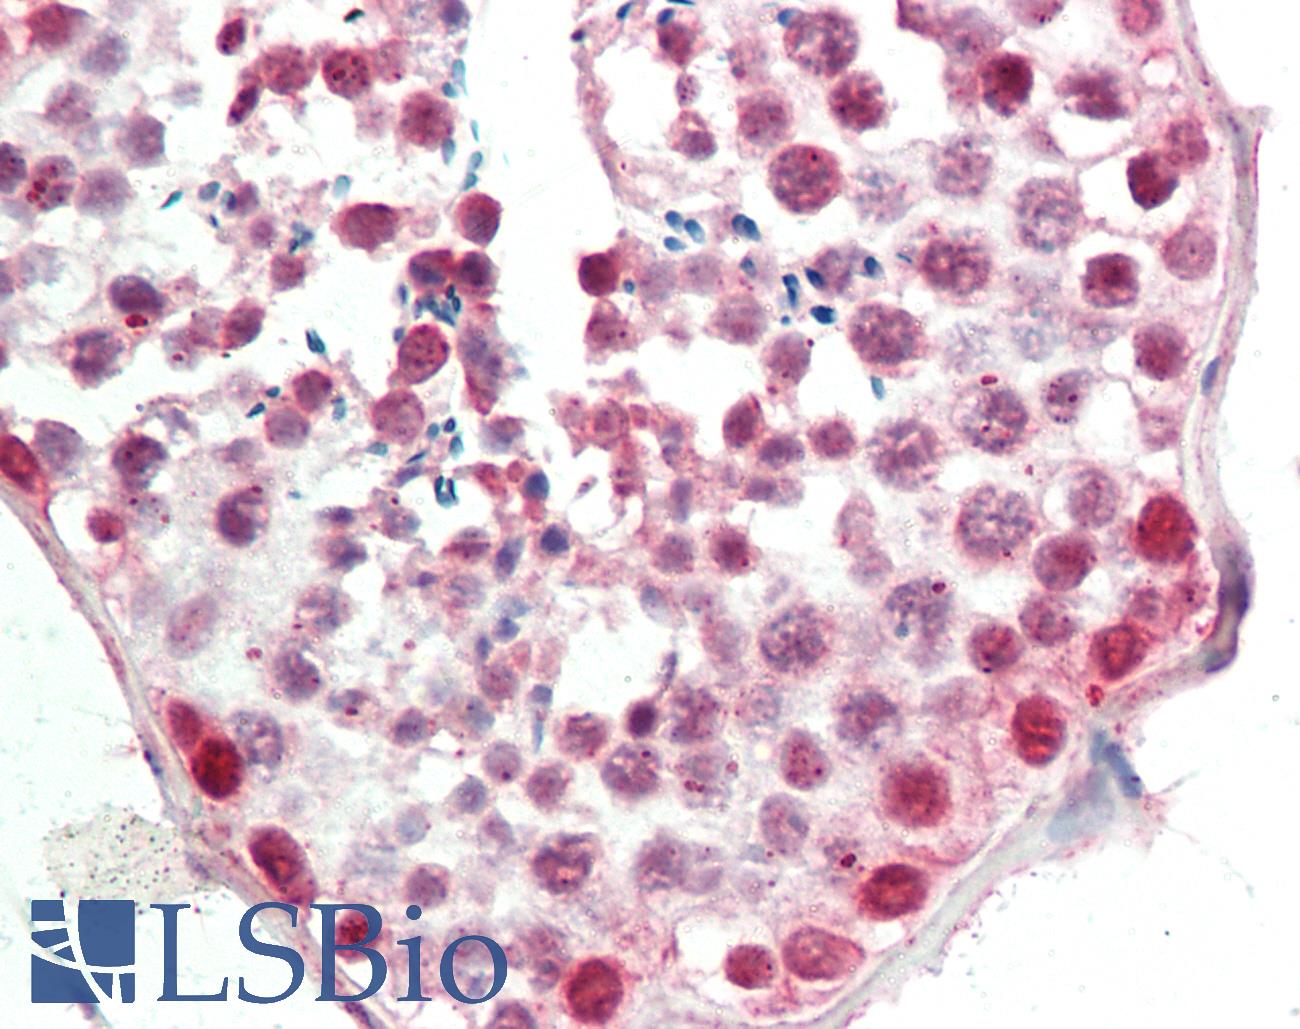 HSP90AA1 / Hsp90 Alpha A1 Antibody - Anti-HSP90AA1 / Hsp90 antibody IHC staining of human testis. Immunohistochemistry of formalin-fixed, paraffin-embedded tissue after heat-induced antigen retrieval.